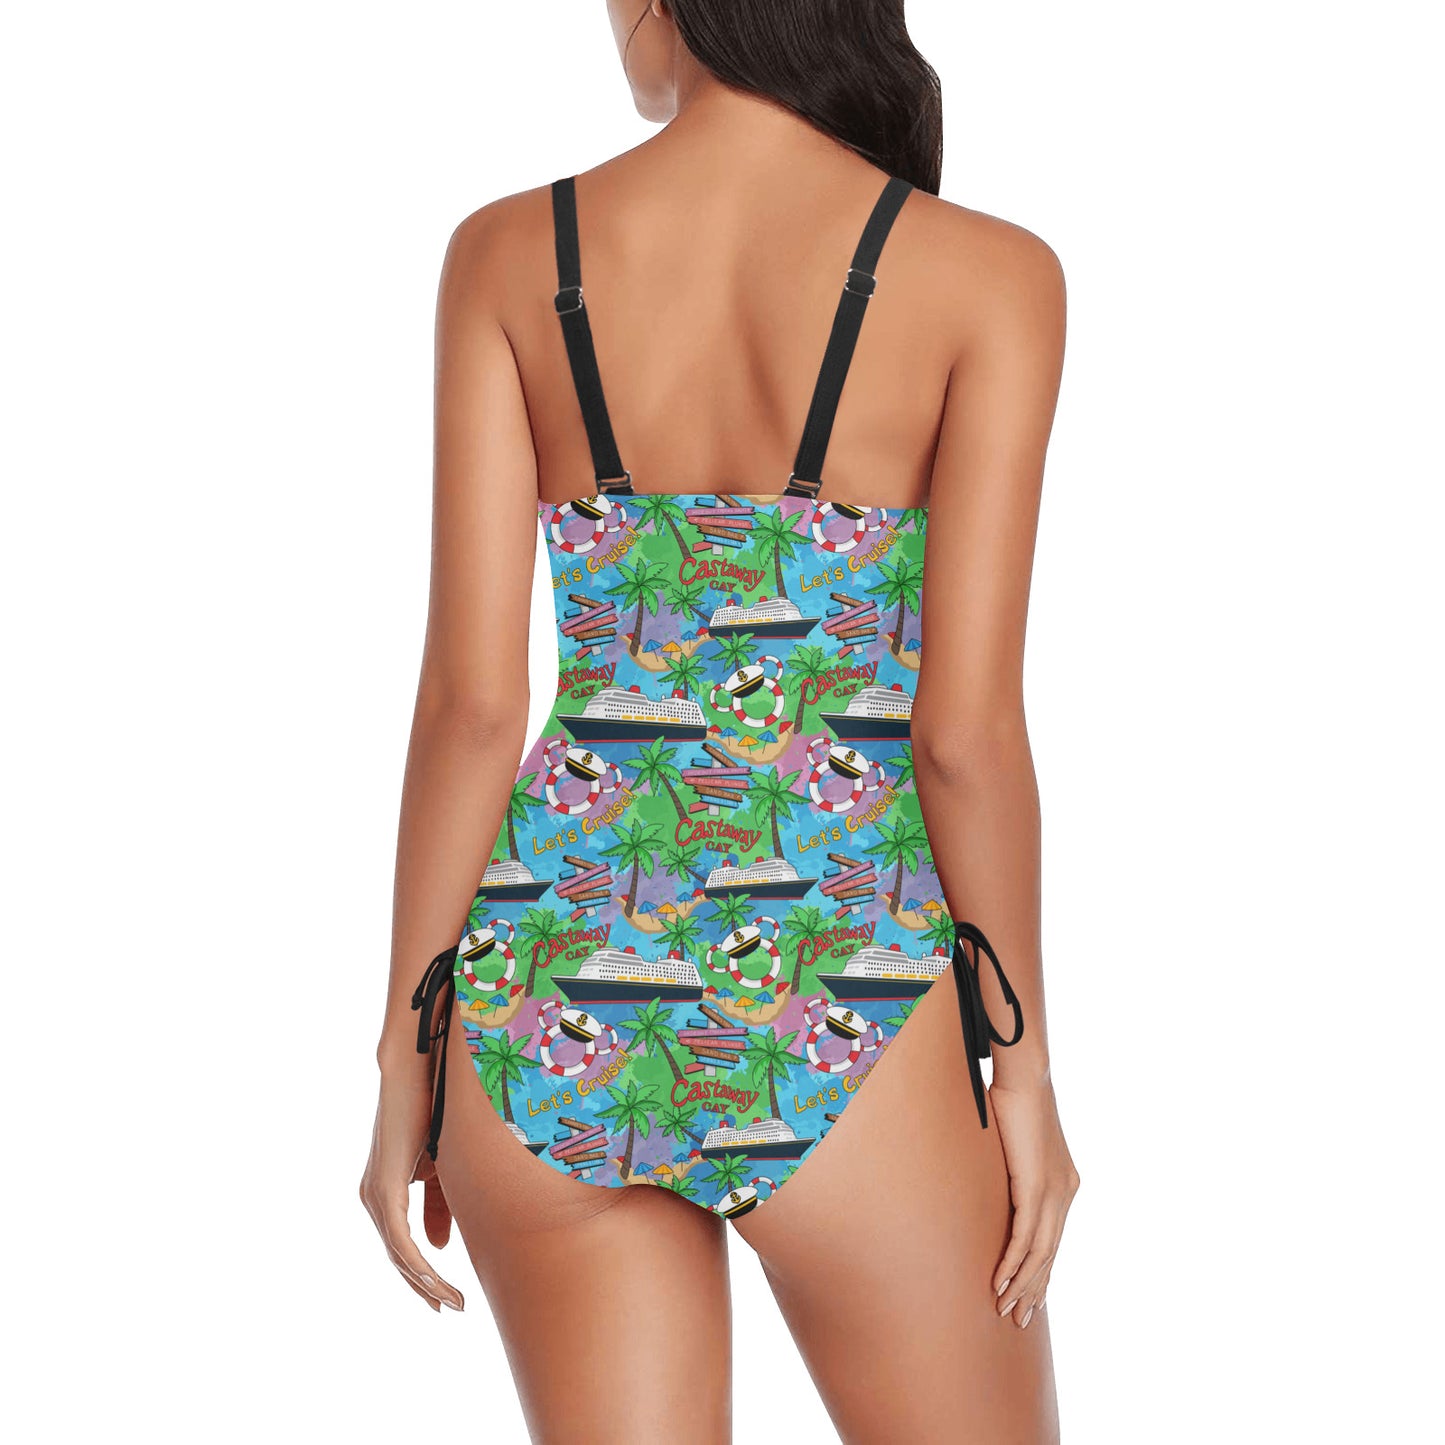 Let's Cruise Drawstring Side Women's One-Piece Swimsuit